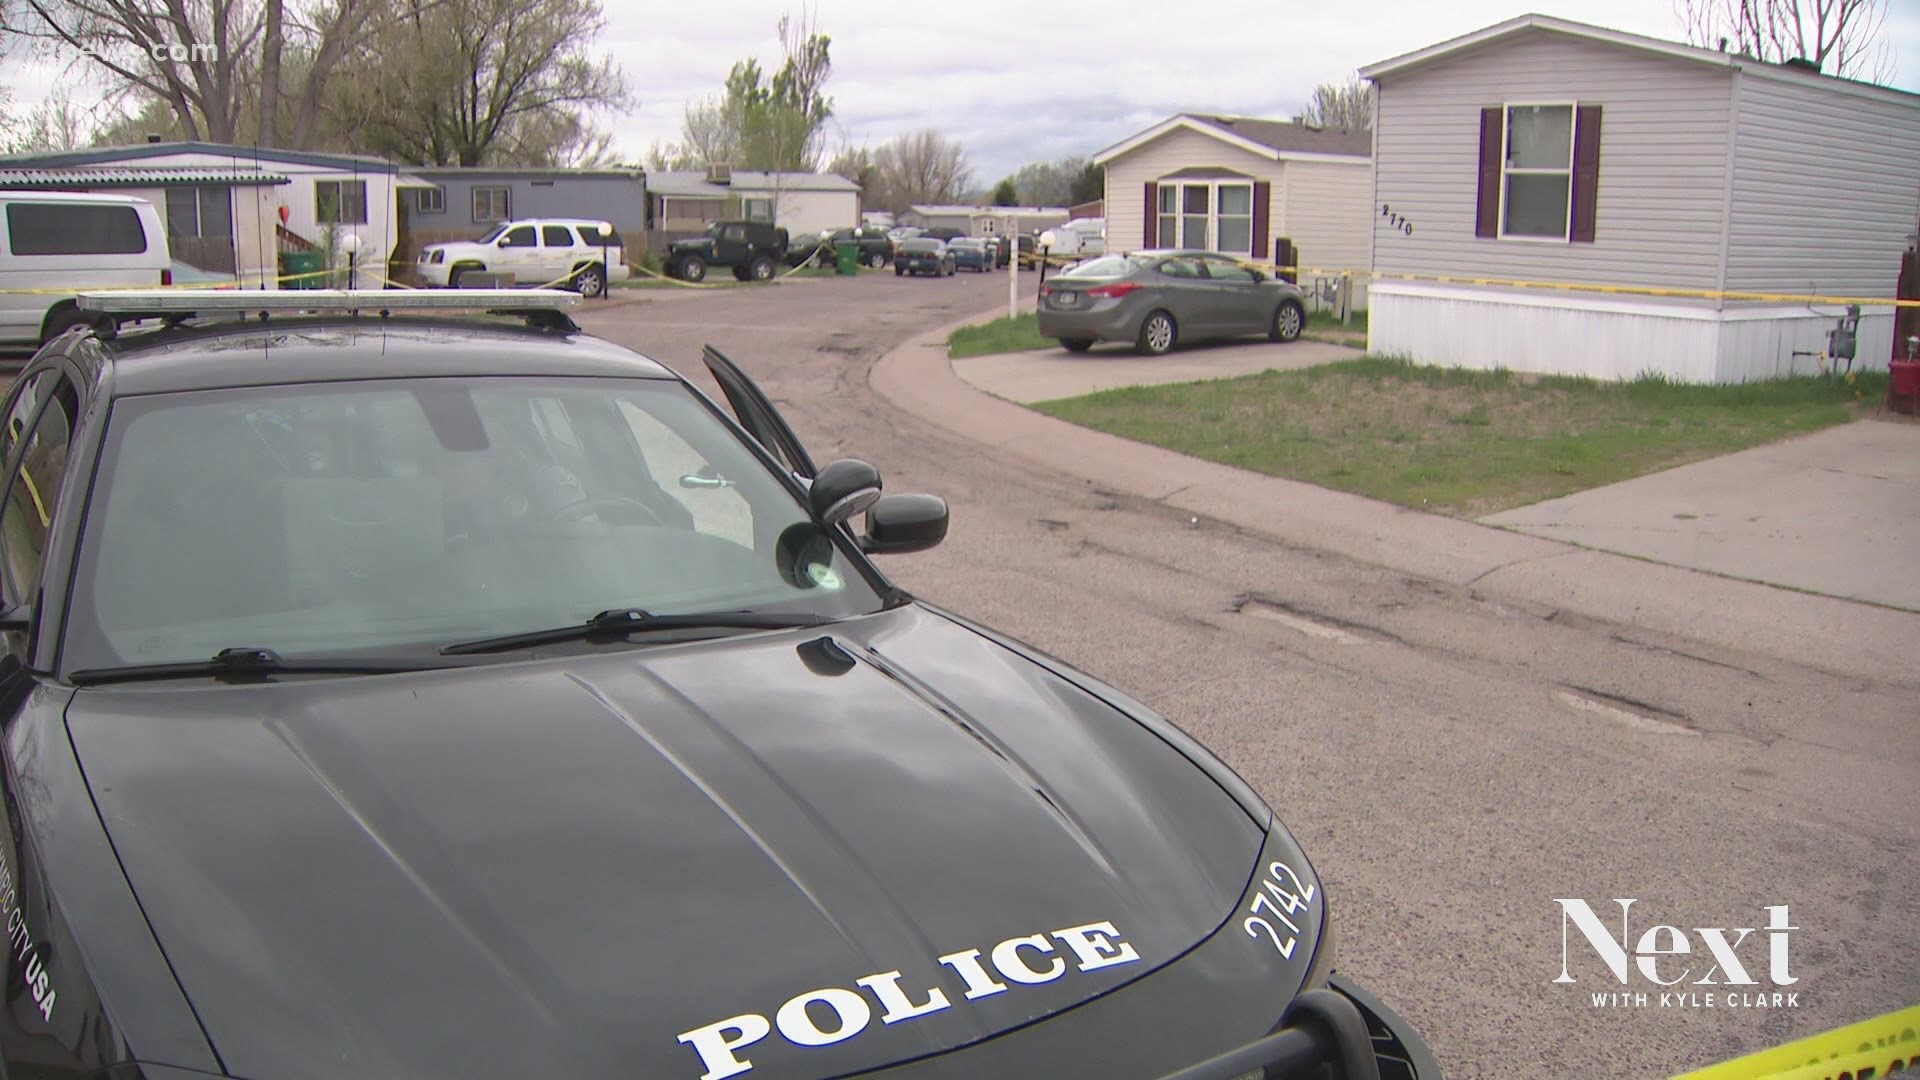 Police say a man killed his girlfriend, 5 others, and then himself. We look at the link between domestic violence and mass murder, and Colorado's issues with both.